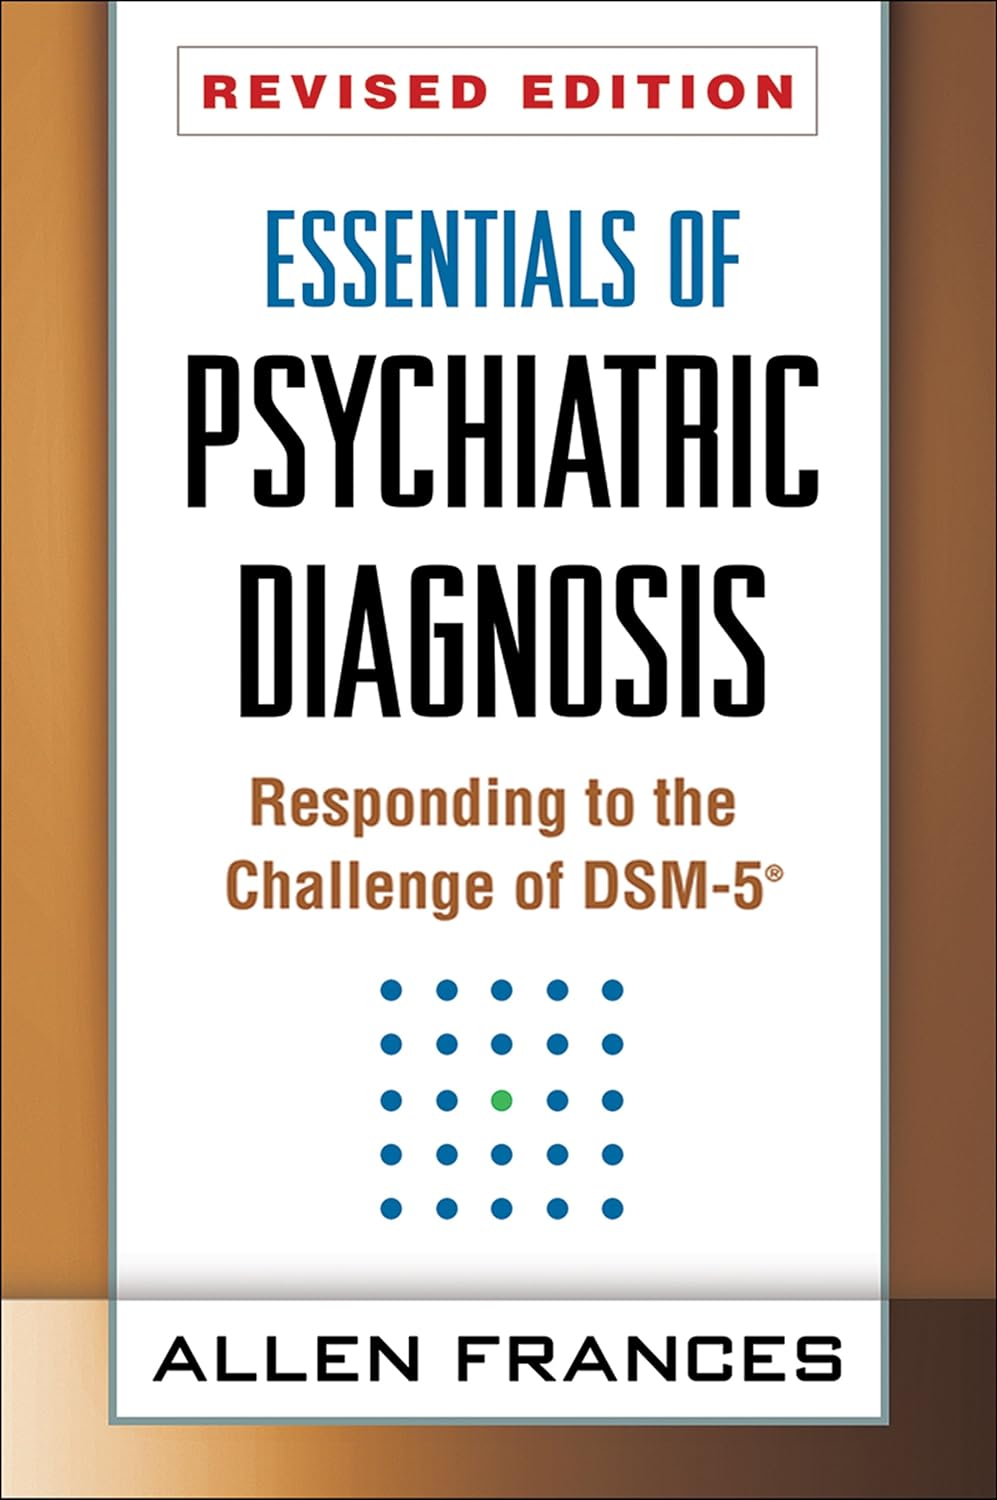 ESSENTIALS OF PSYCH AGNOSIS Responding to the Challenge of DSM-5 by Allen Frances